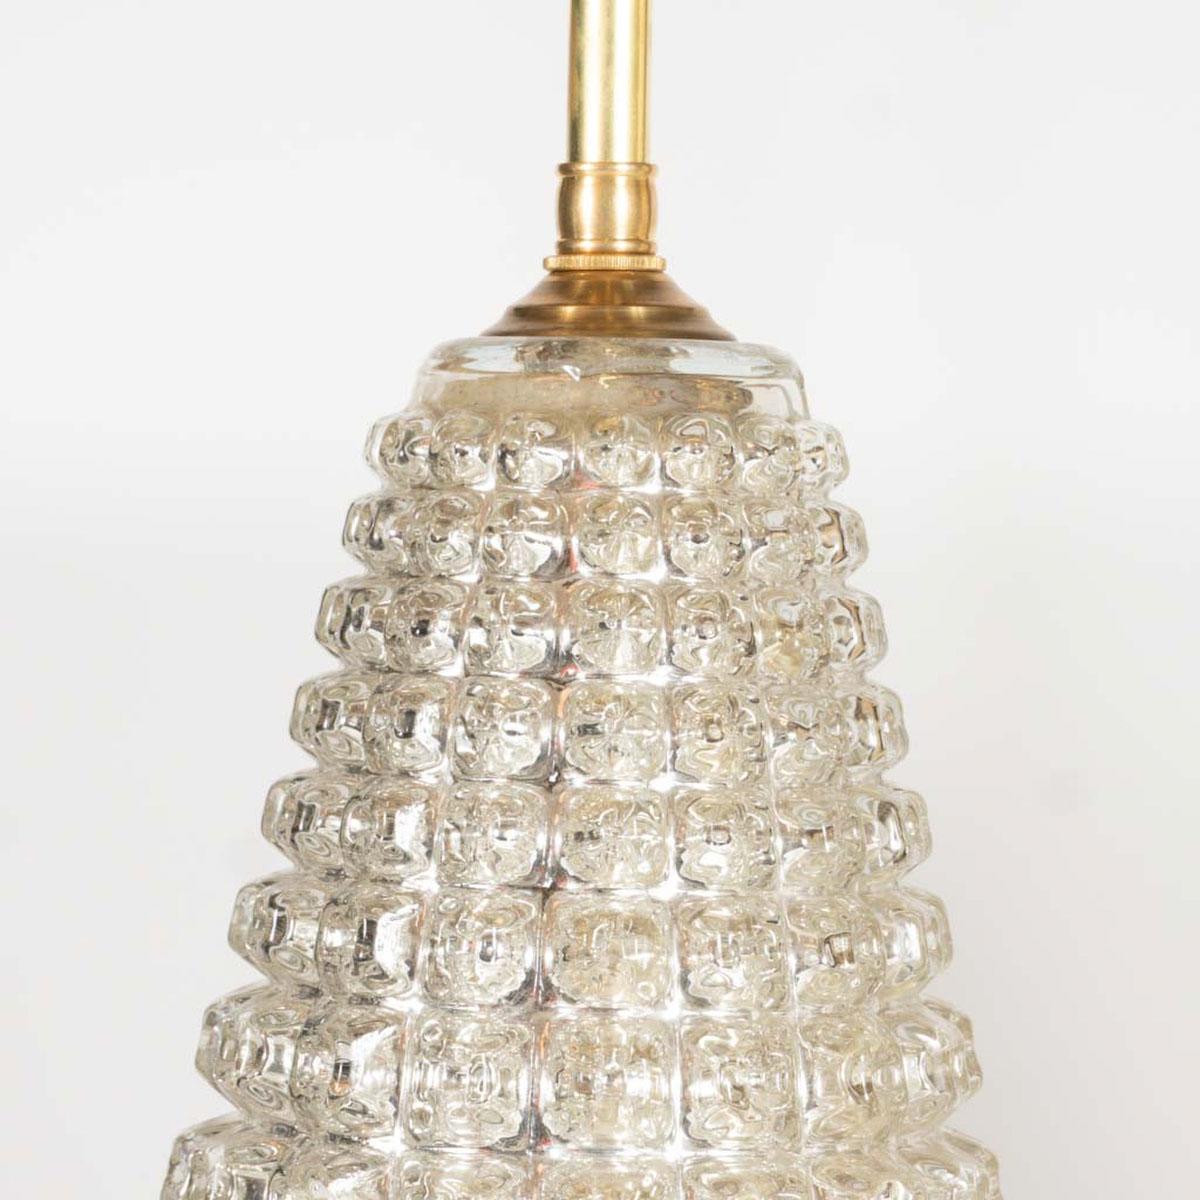 Pair of faceted mercury glass table lamps In Excellent Condition For Sale In Tarrytown, NY